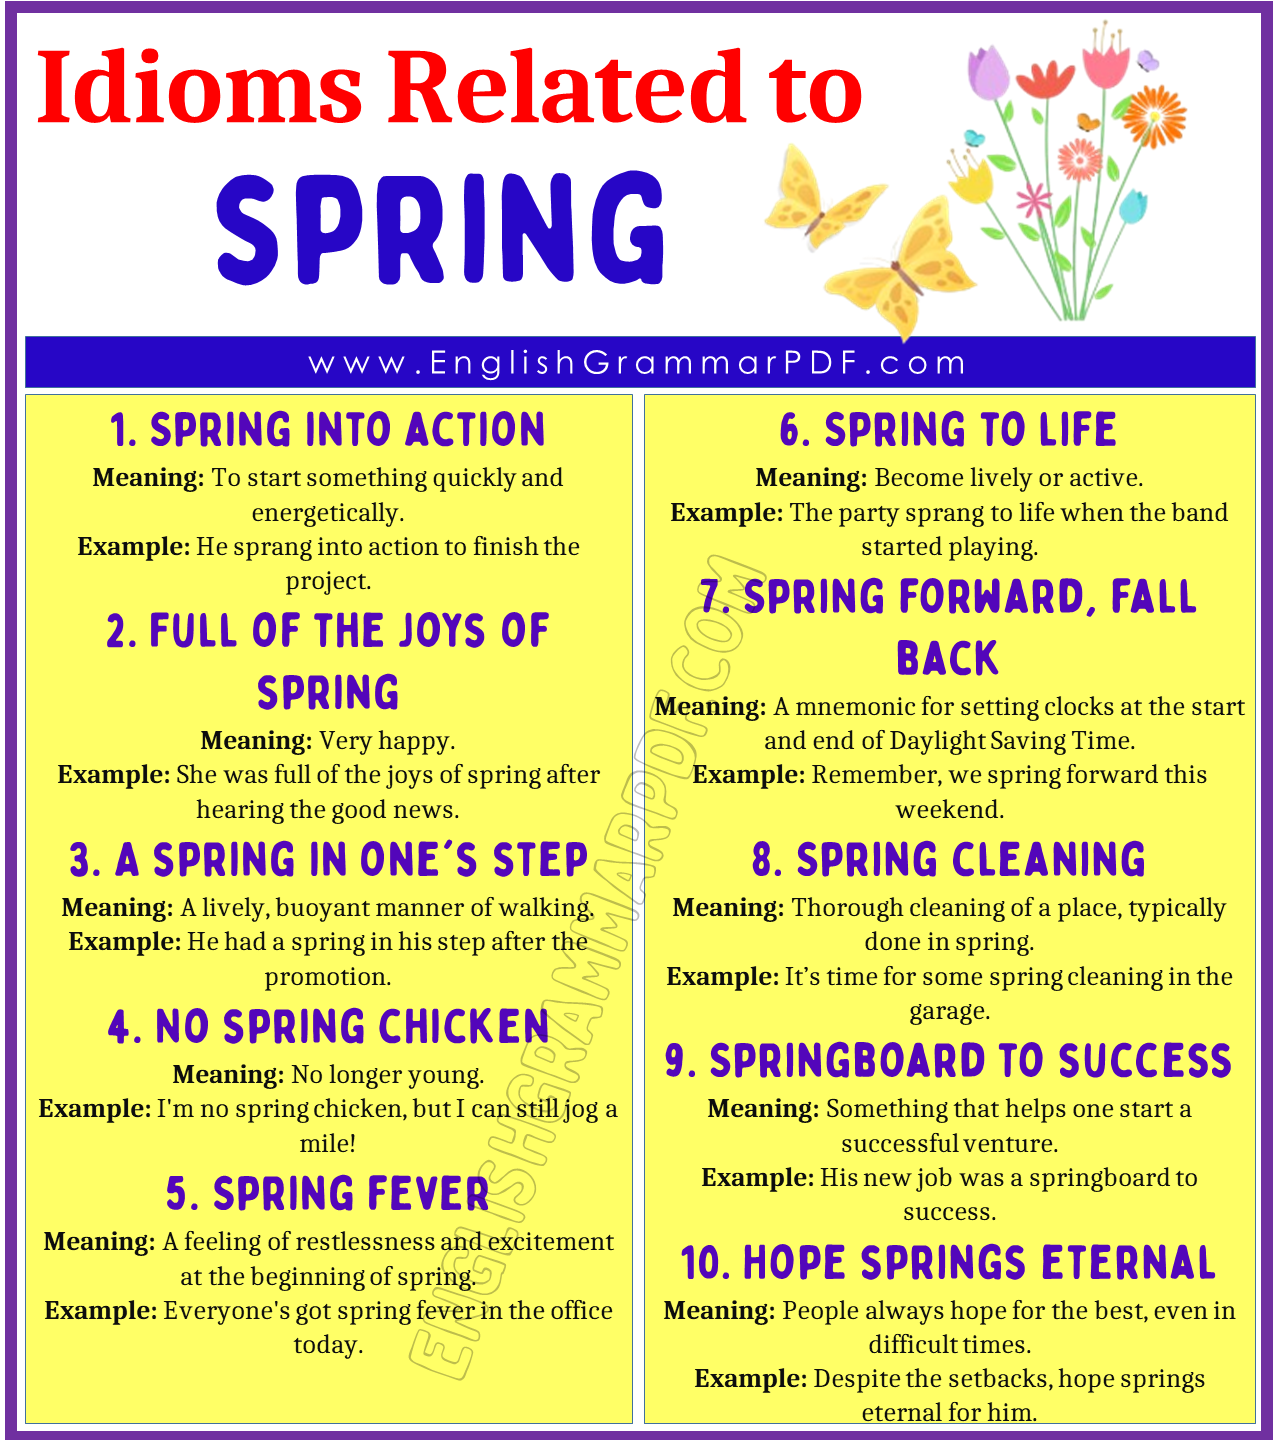 Idioms Related to Spring